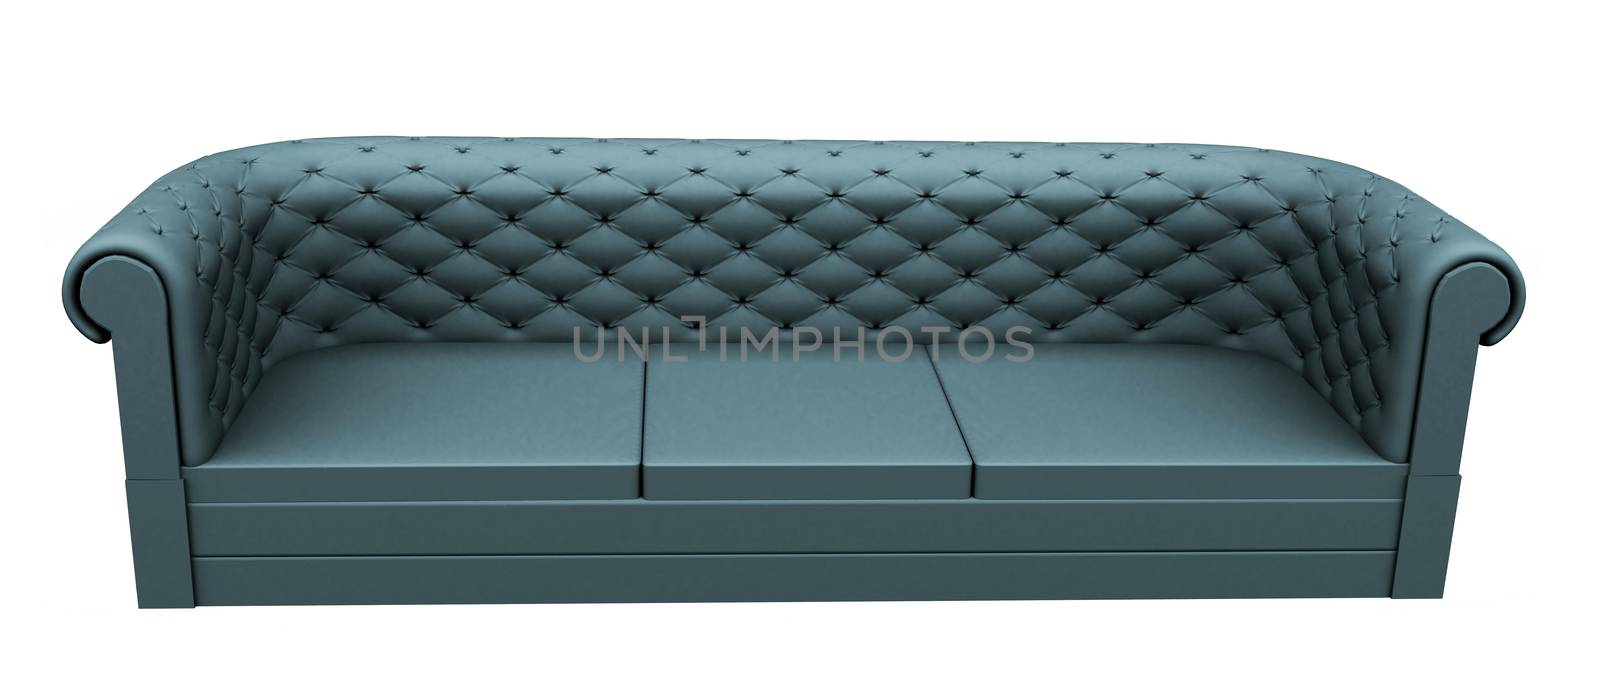 Turquoise three place leather or fabric sofa by Morphart